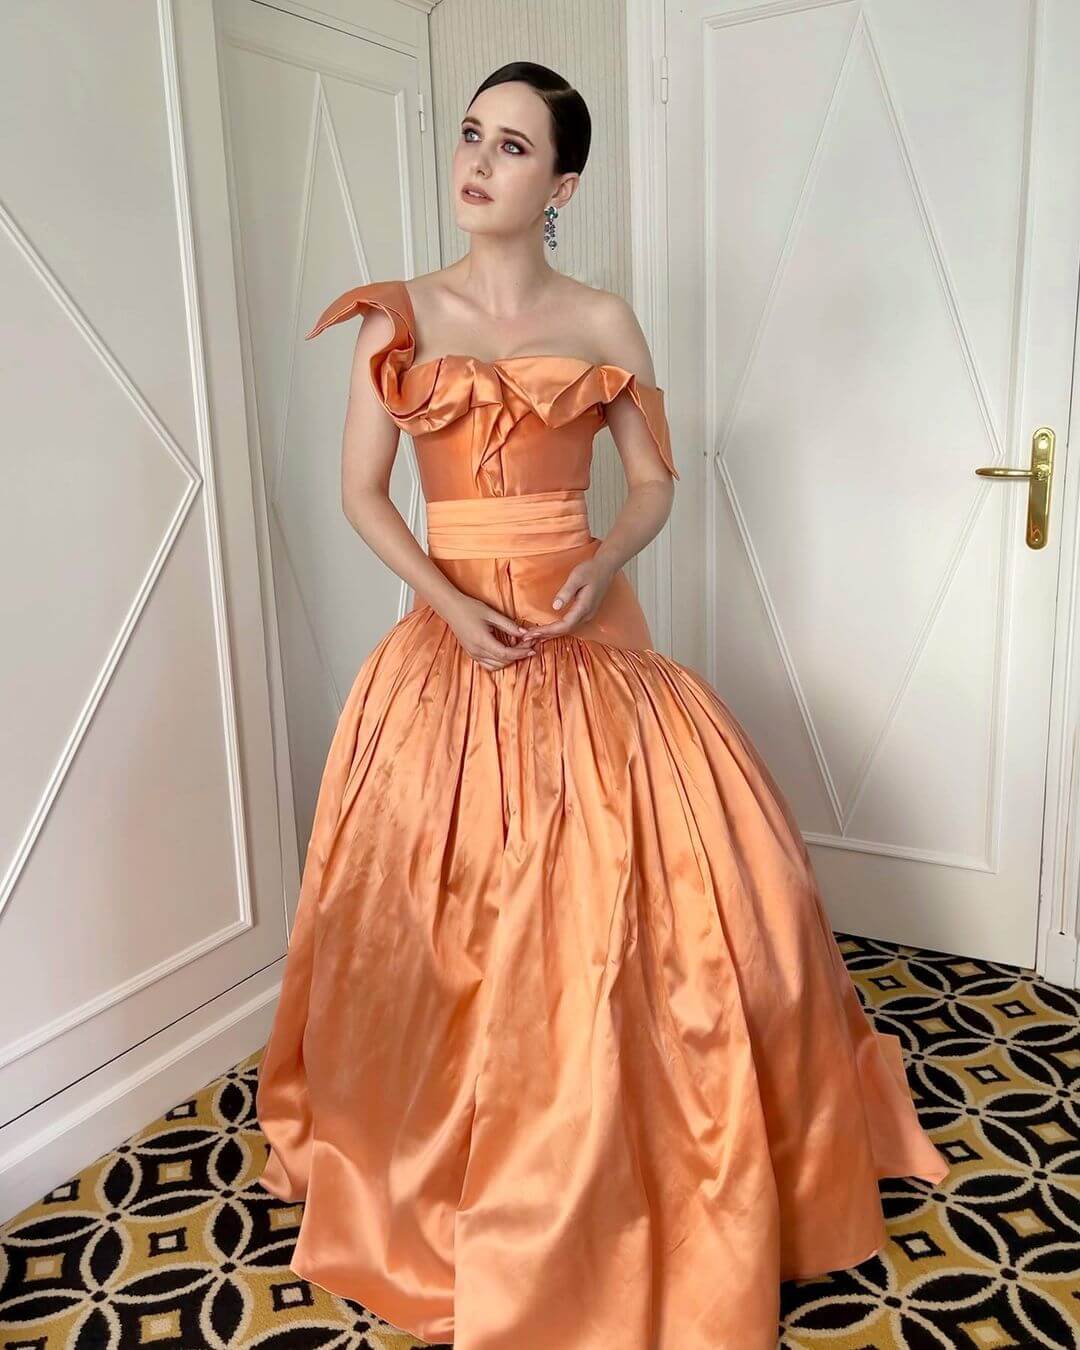 Rachel Dolled Up In Orange Ball Gown